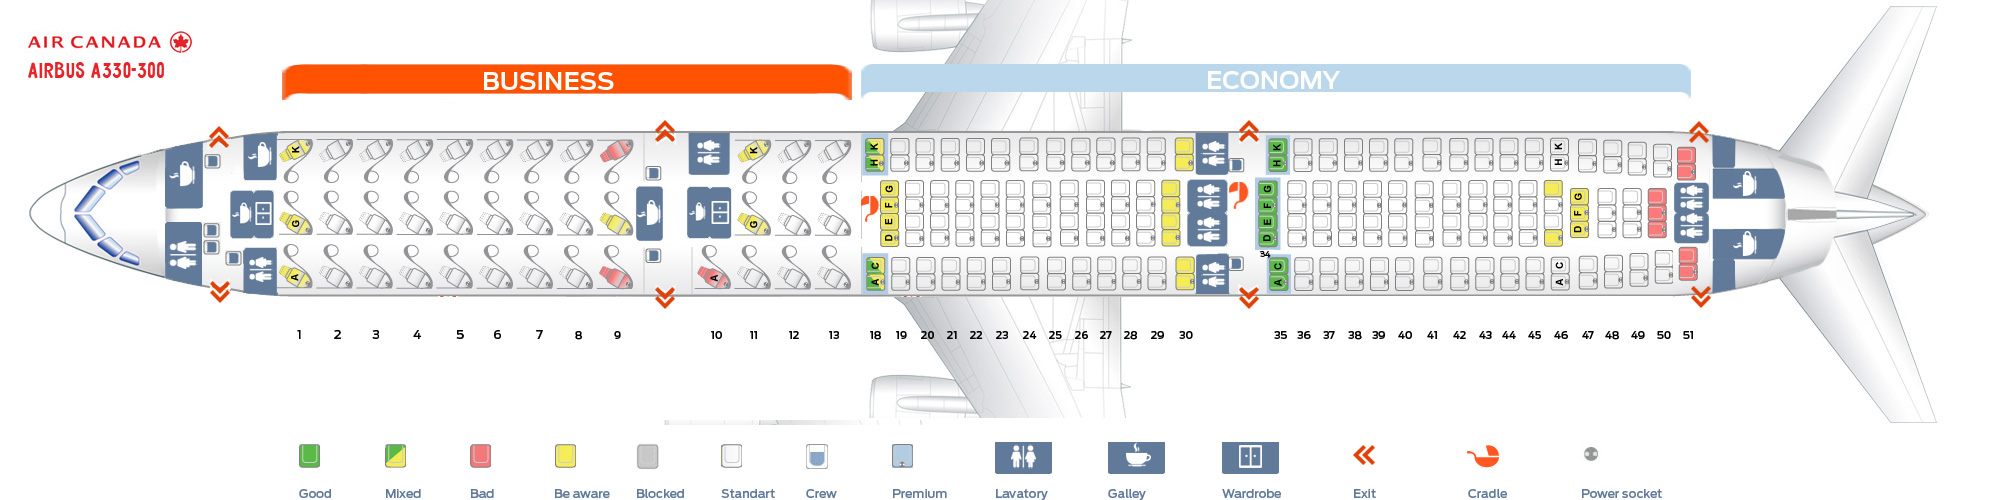 Seat Map Airbus A330 300 Air Canada Best Seats In Plane